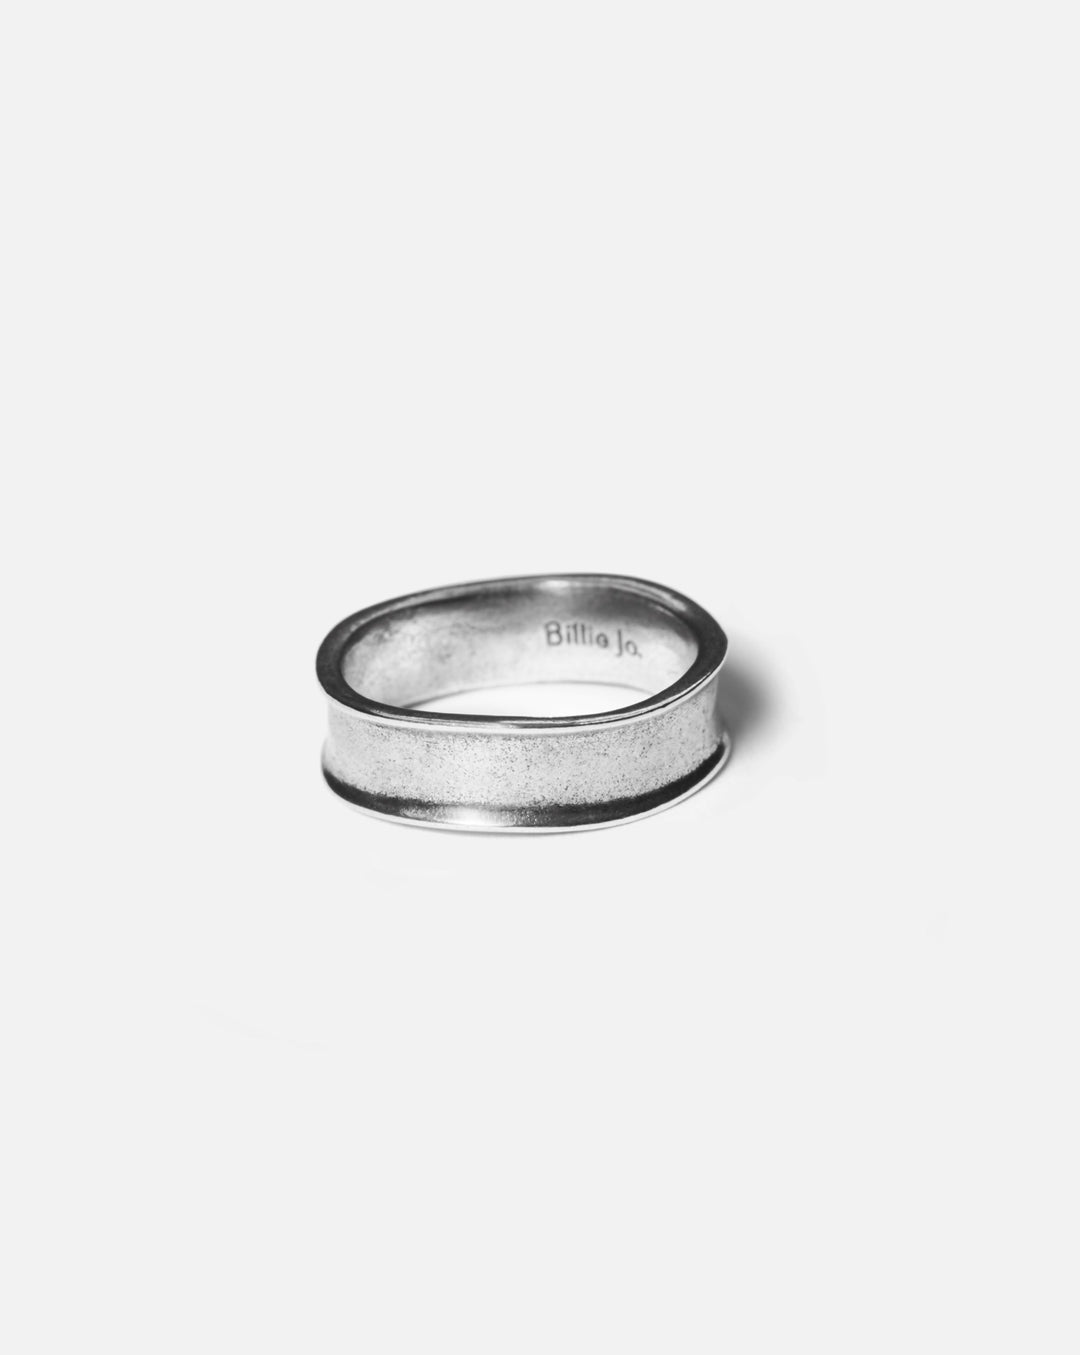 Forge Ring